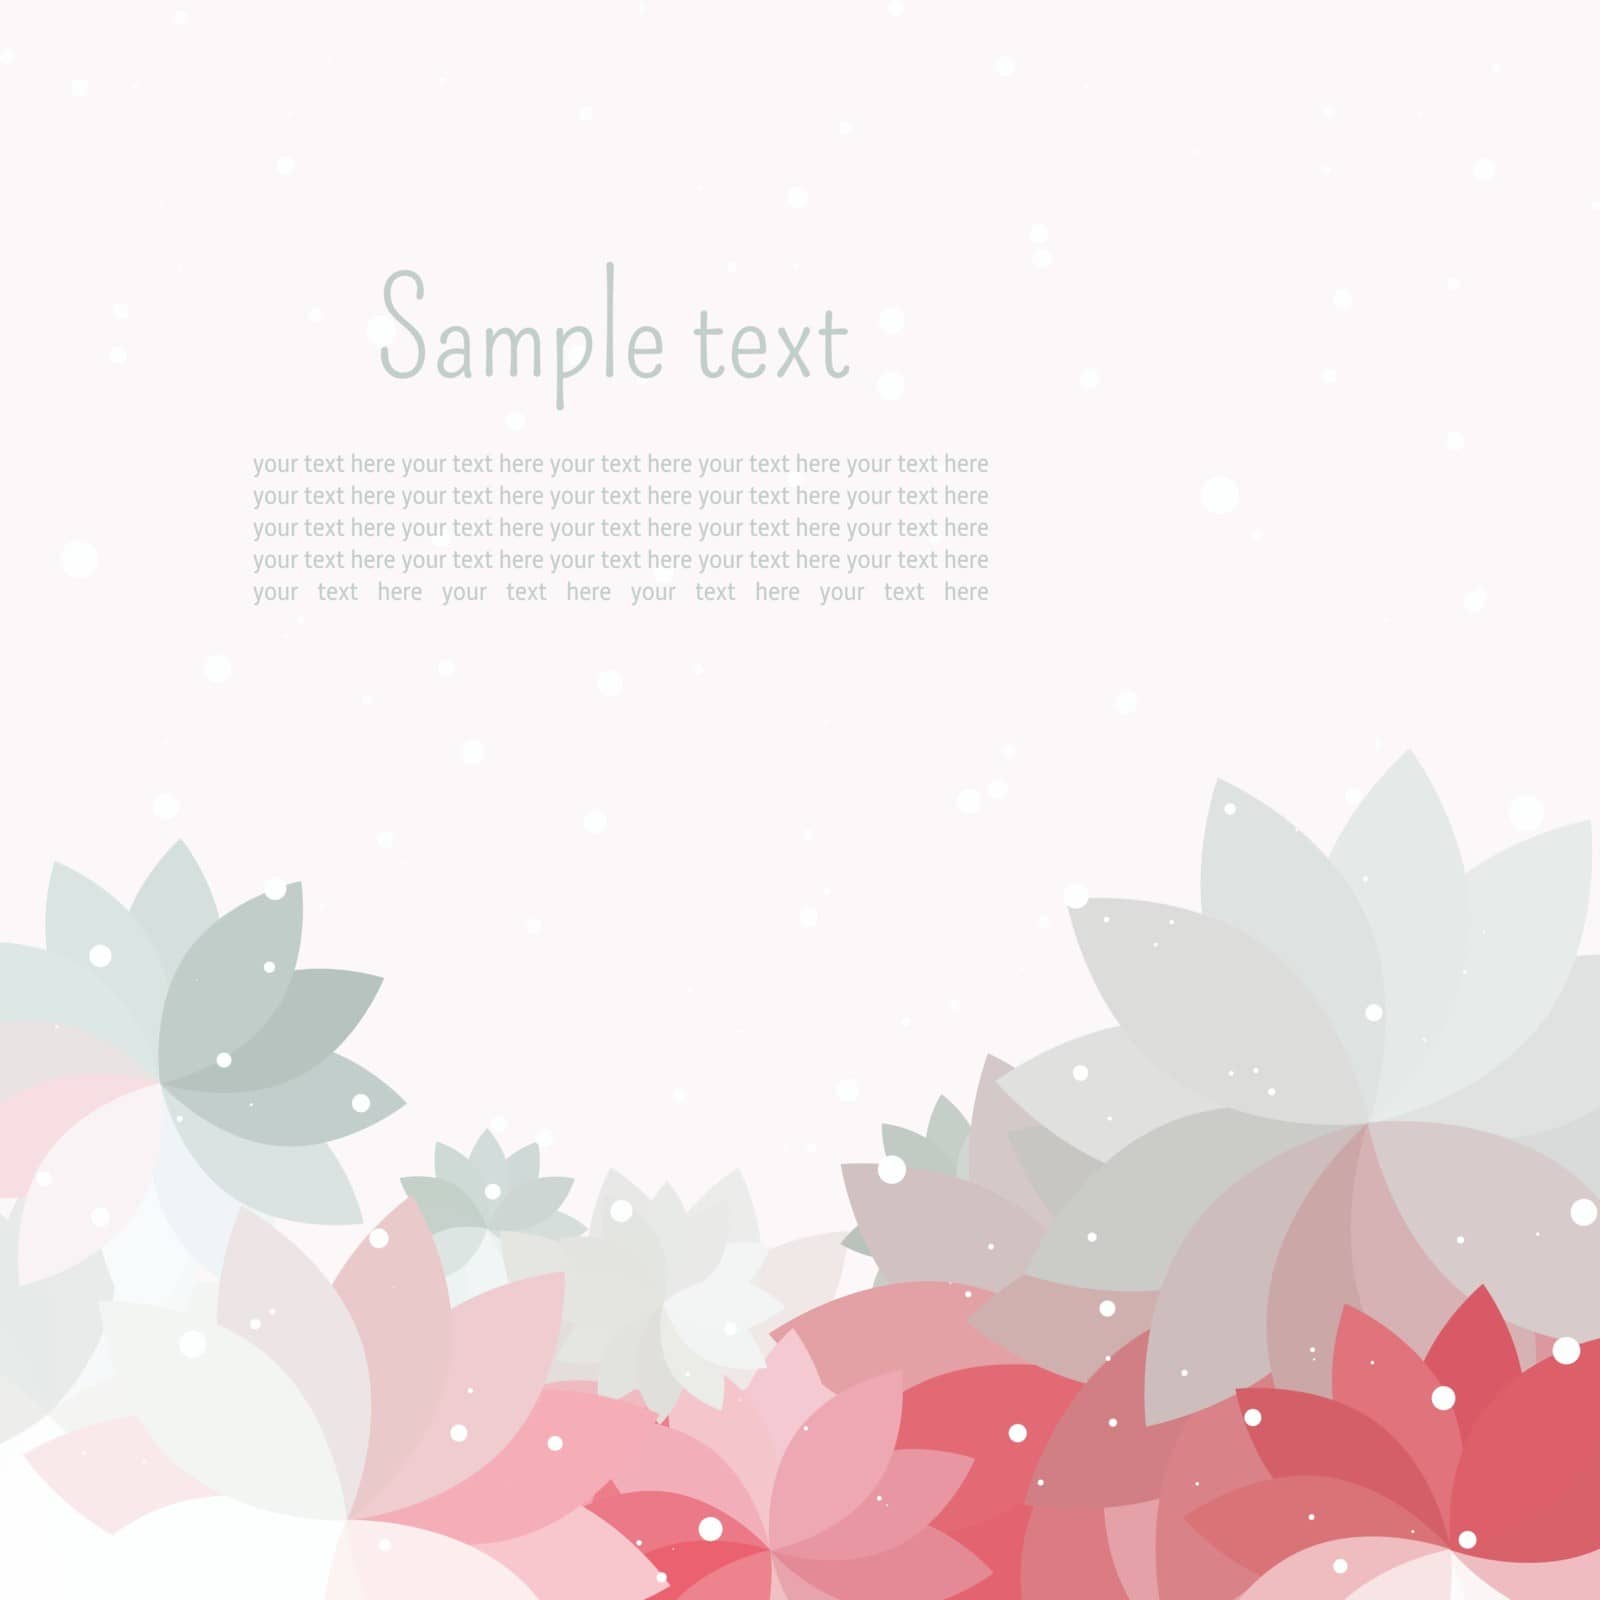 Postcard or a vignette for text with gray, pink, white petals abstract colors